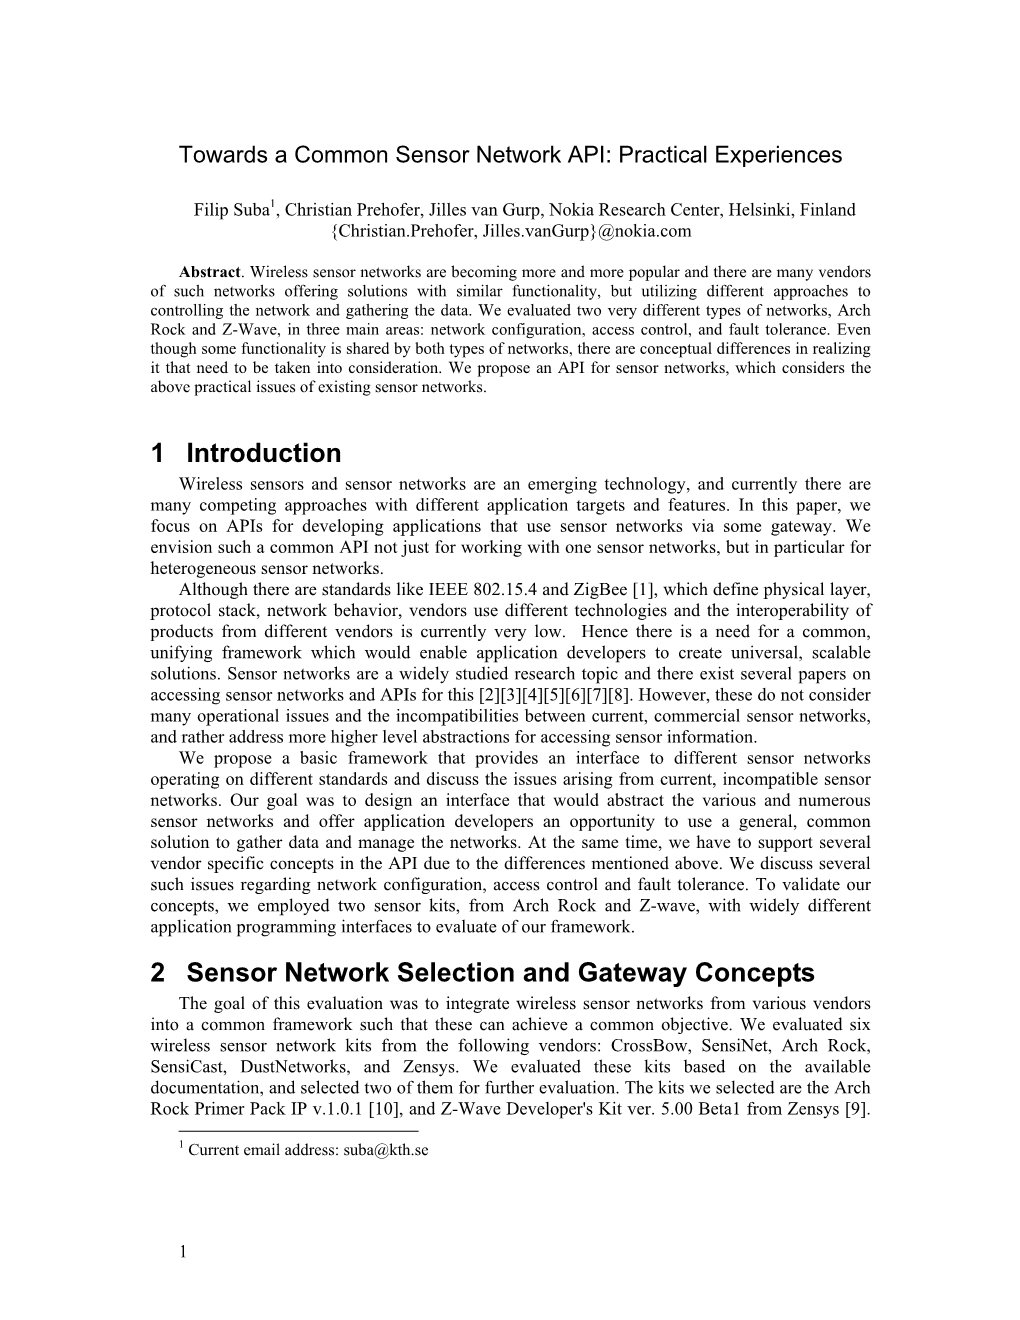 1 Introduction 2 Sensor Network Selection and Gateway Concepts